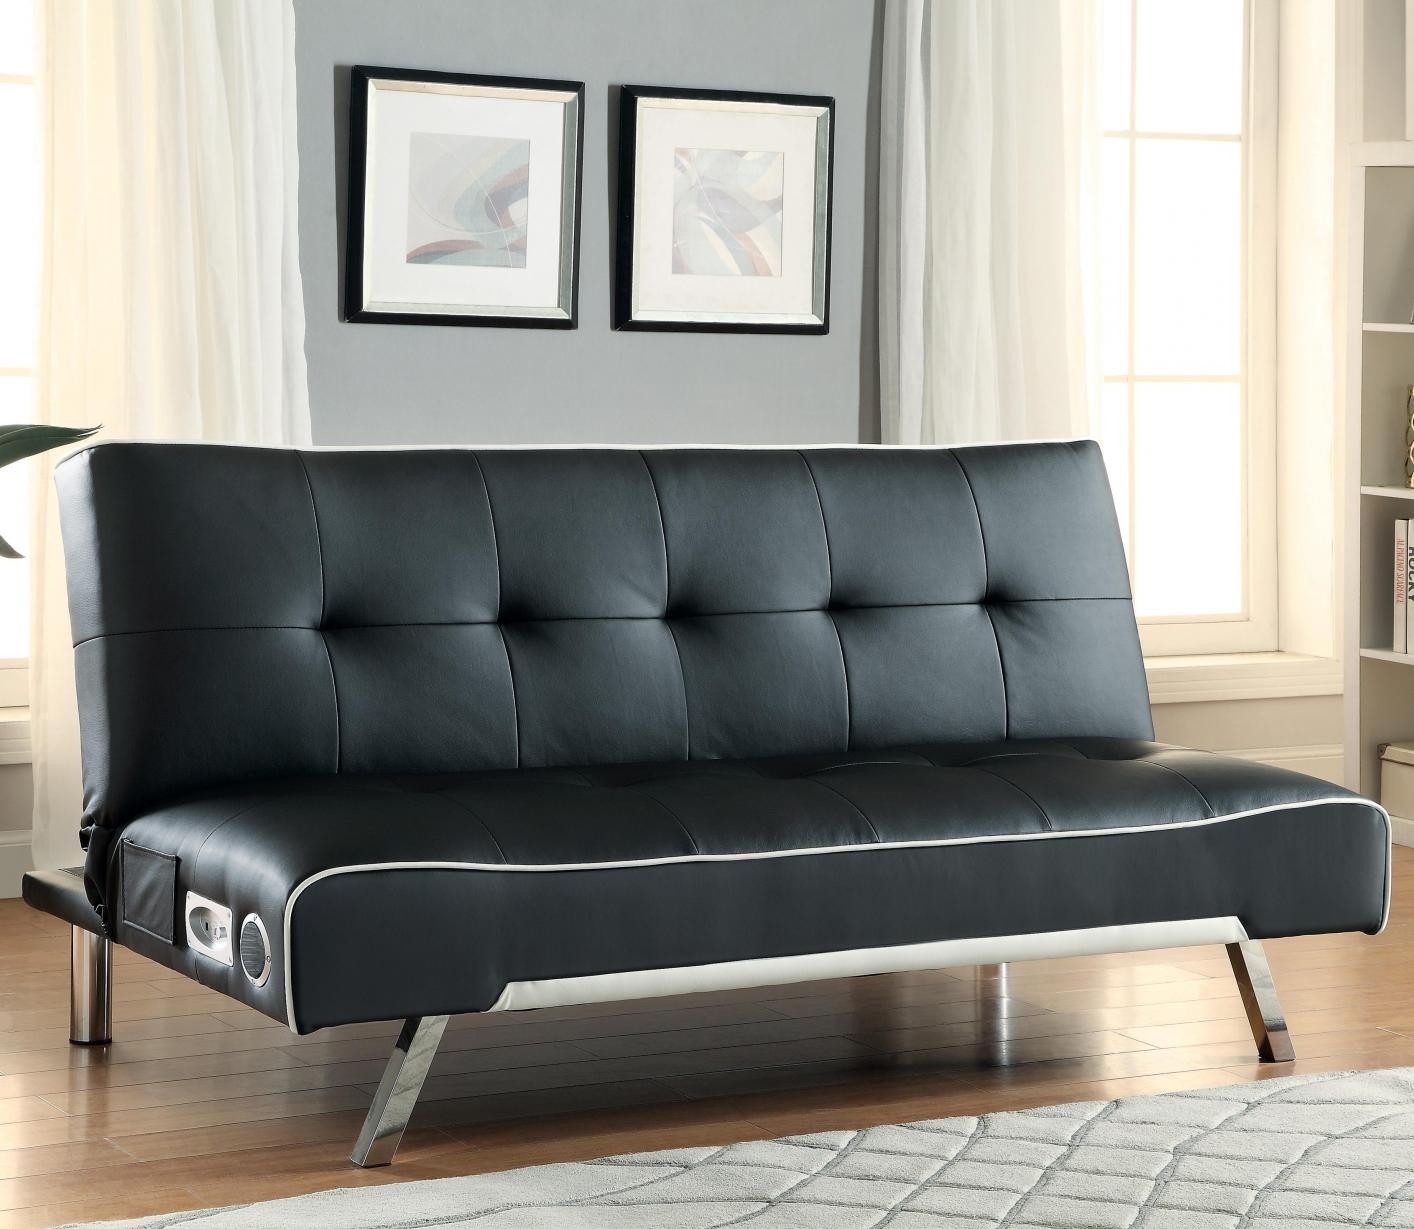 Black leather futon steal a sofa furniture outlet los 4